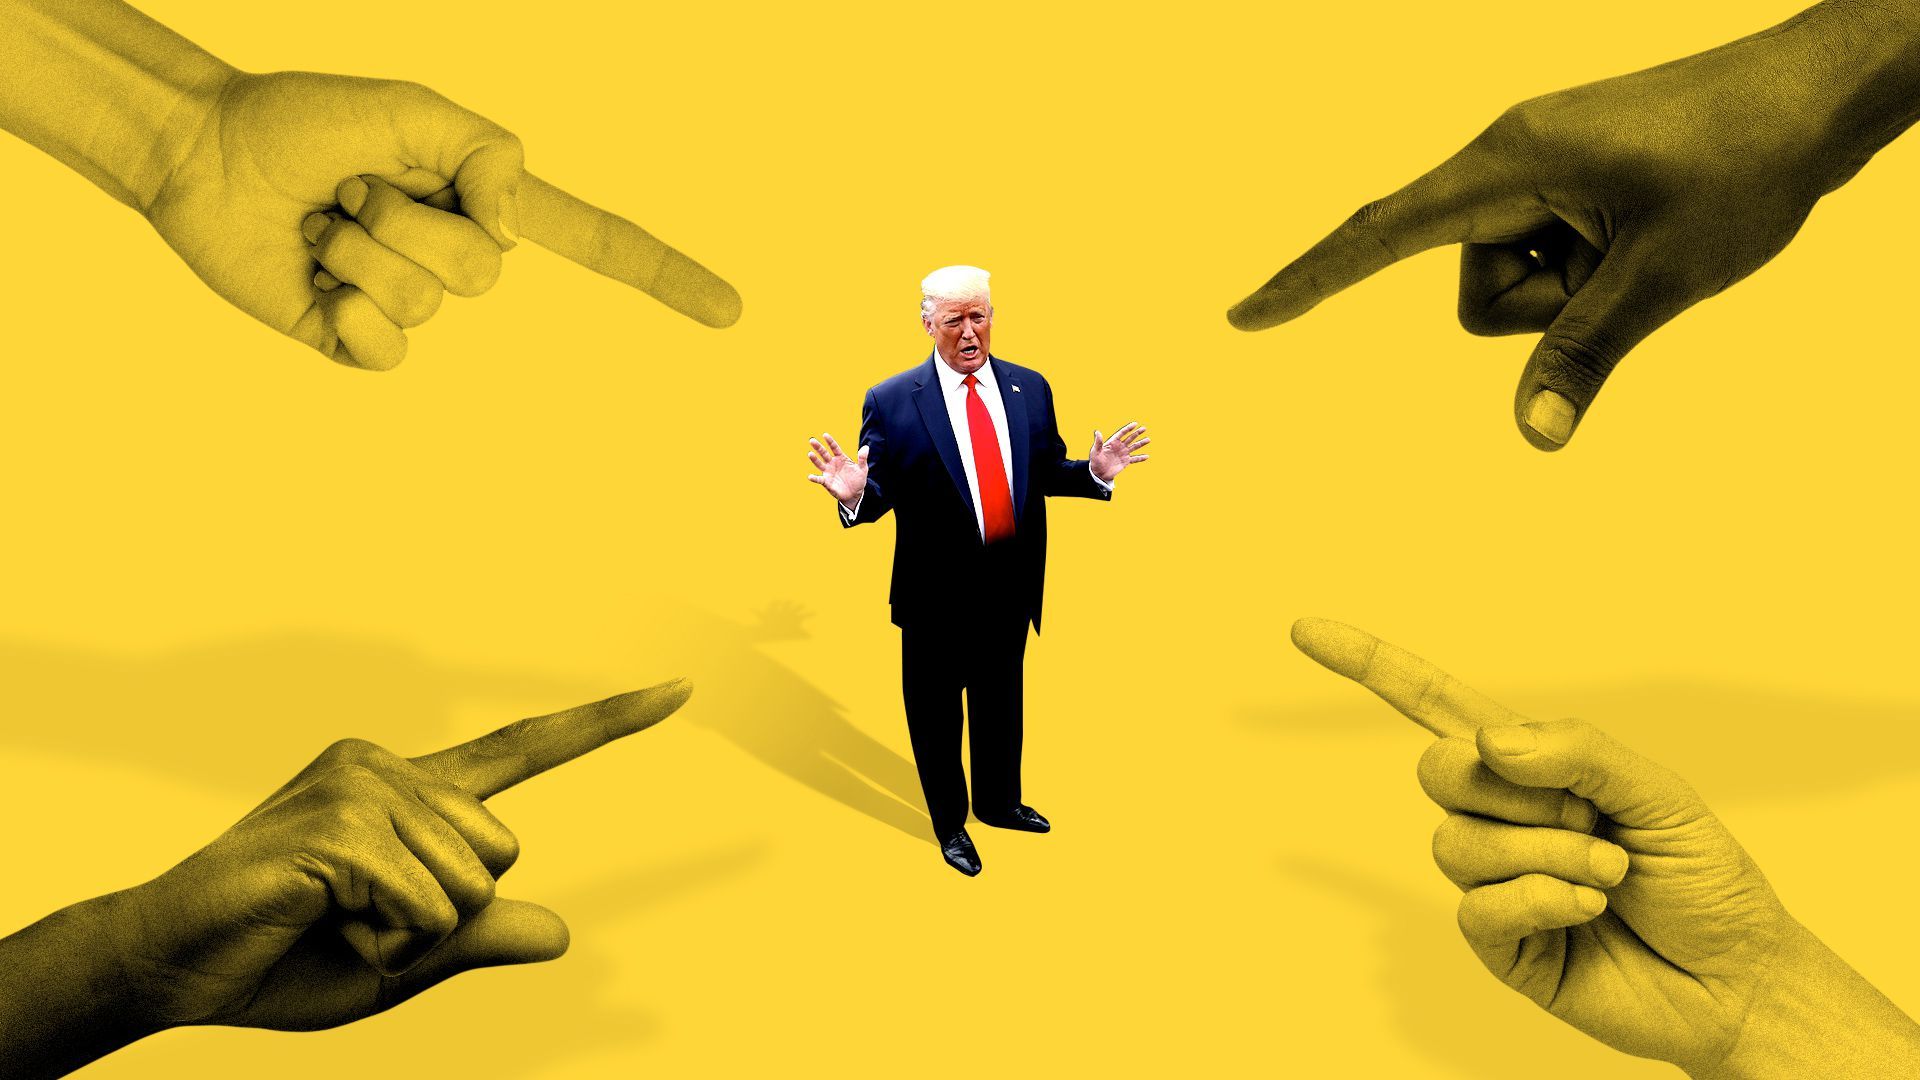 Fingers pointing at Trump